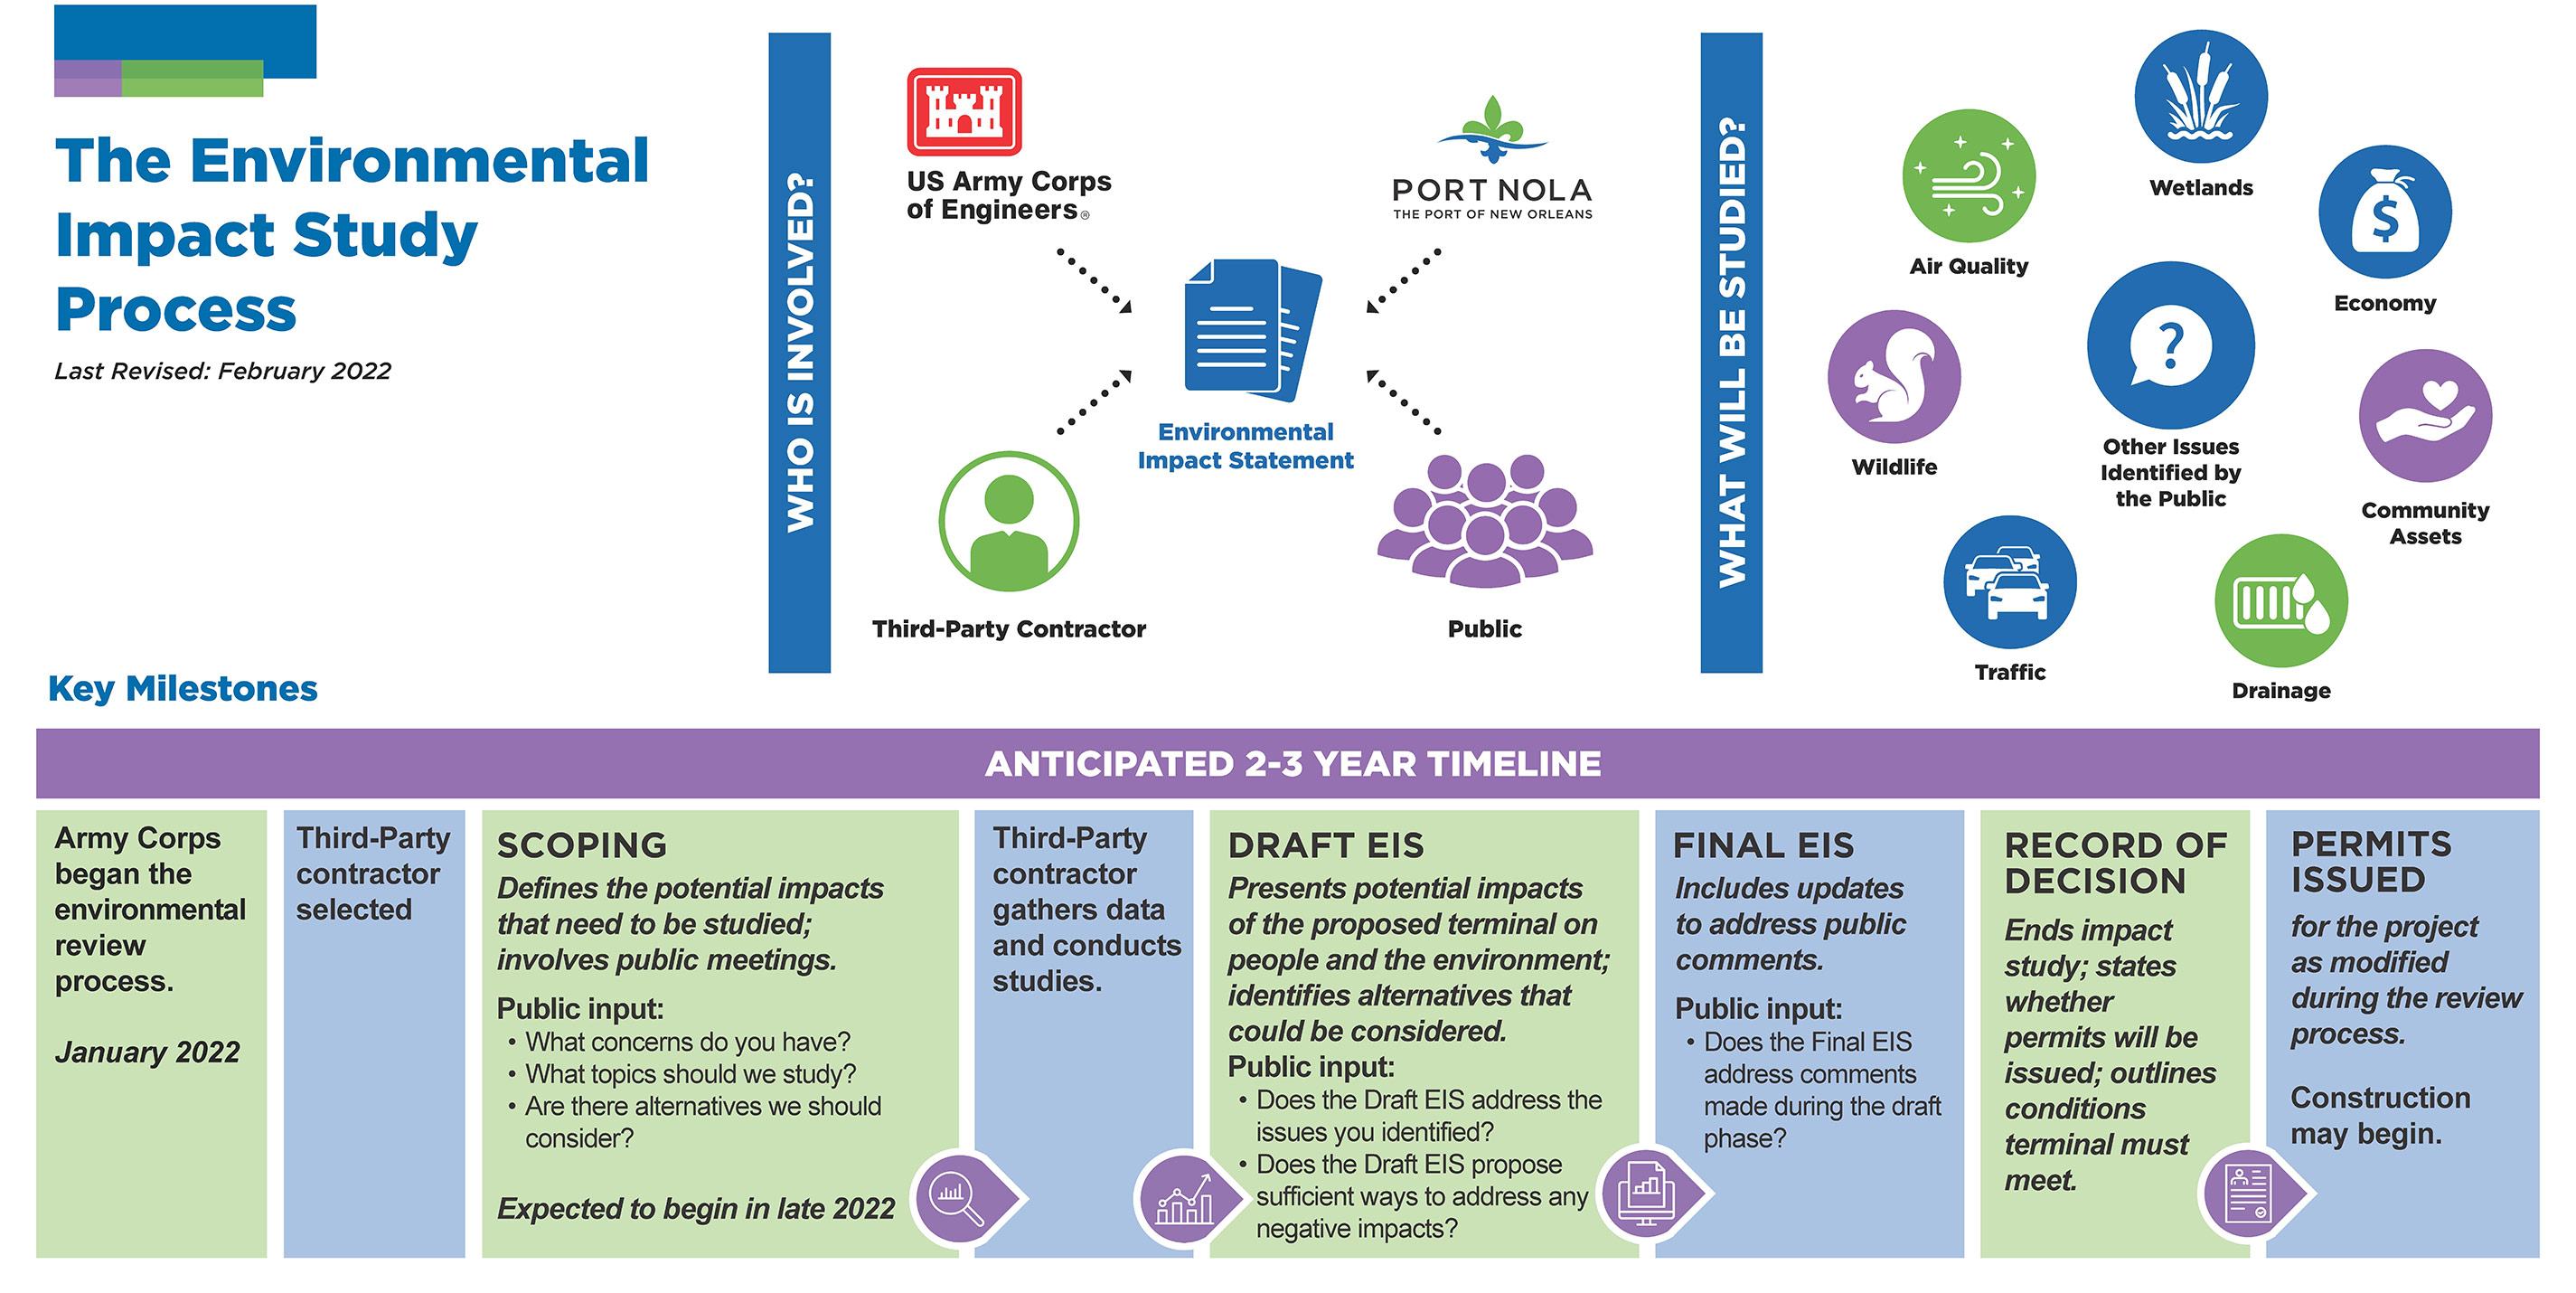 Graphic detailing the environmental impact study process, showing how three different agencies and the public are involved in developing the study, and providing examples of the kinds of things that may be studied, such as wildlife, traffic, air quality, and community assets.